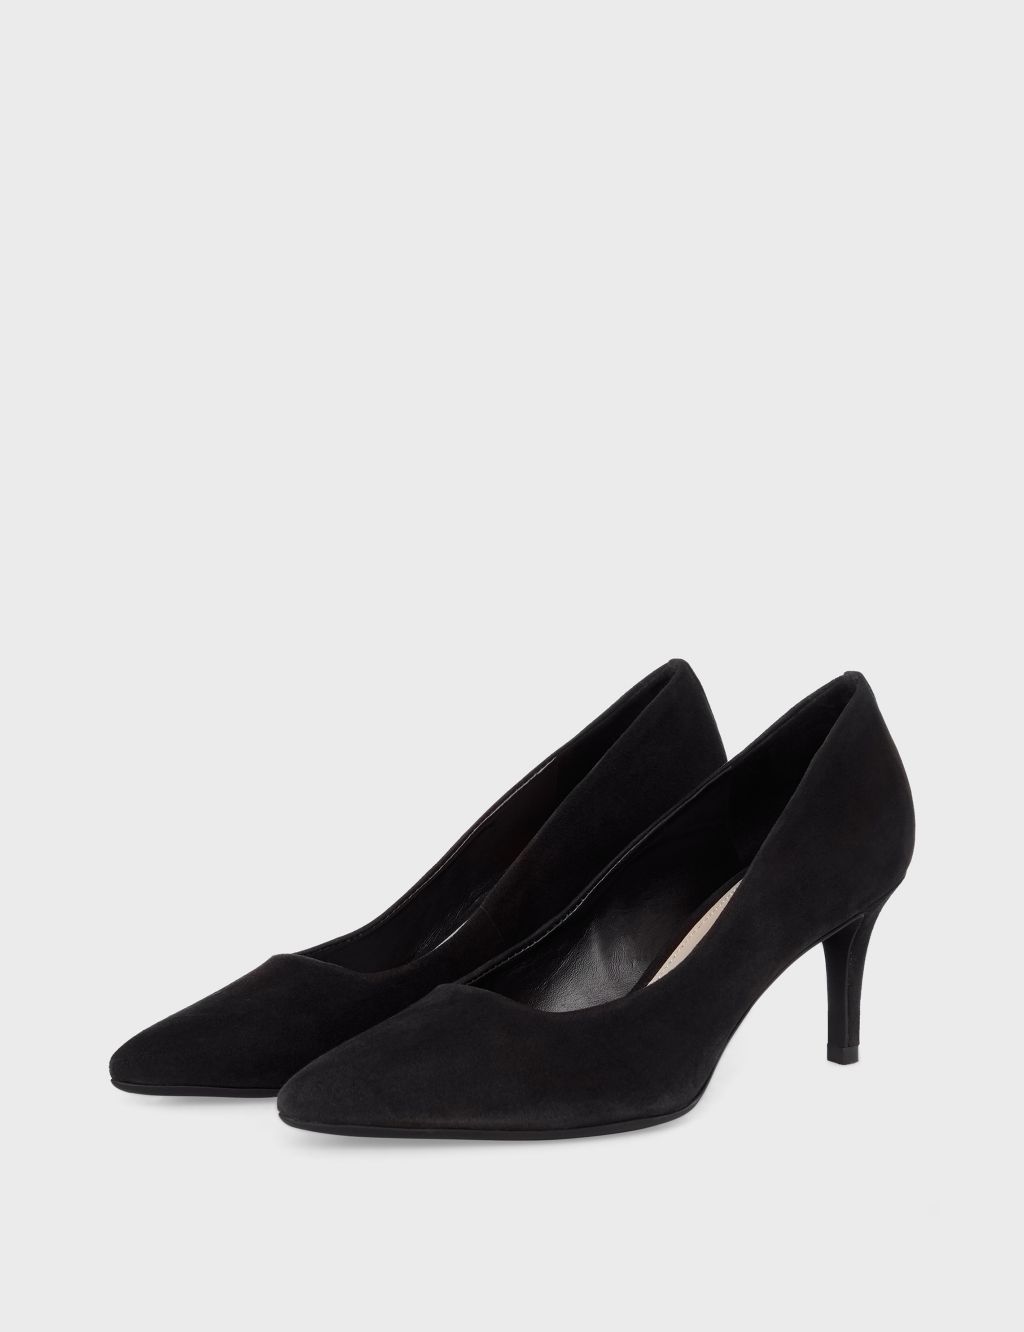 Leather Kitten Heel Pointed Court Shoes image 2